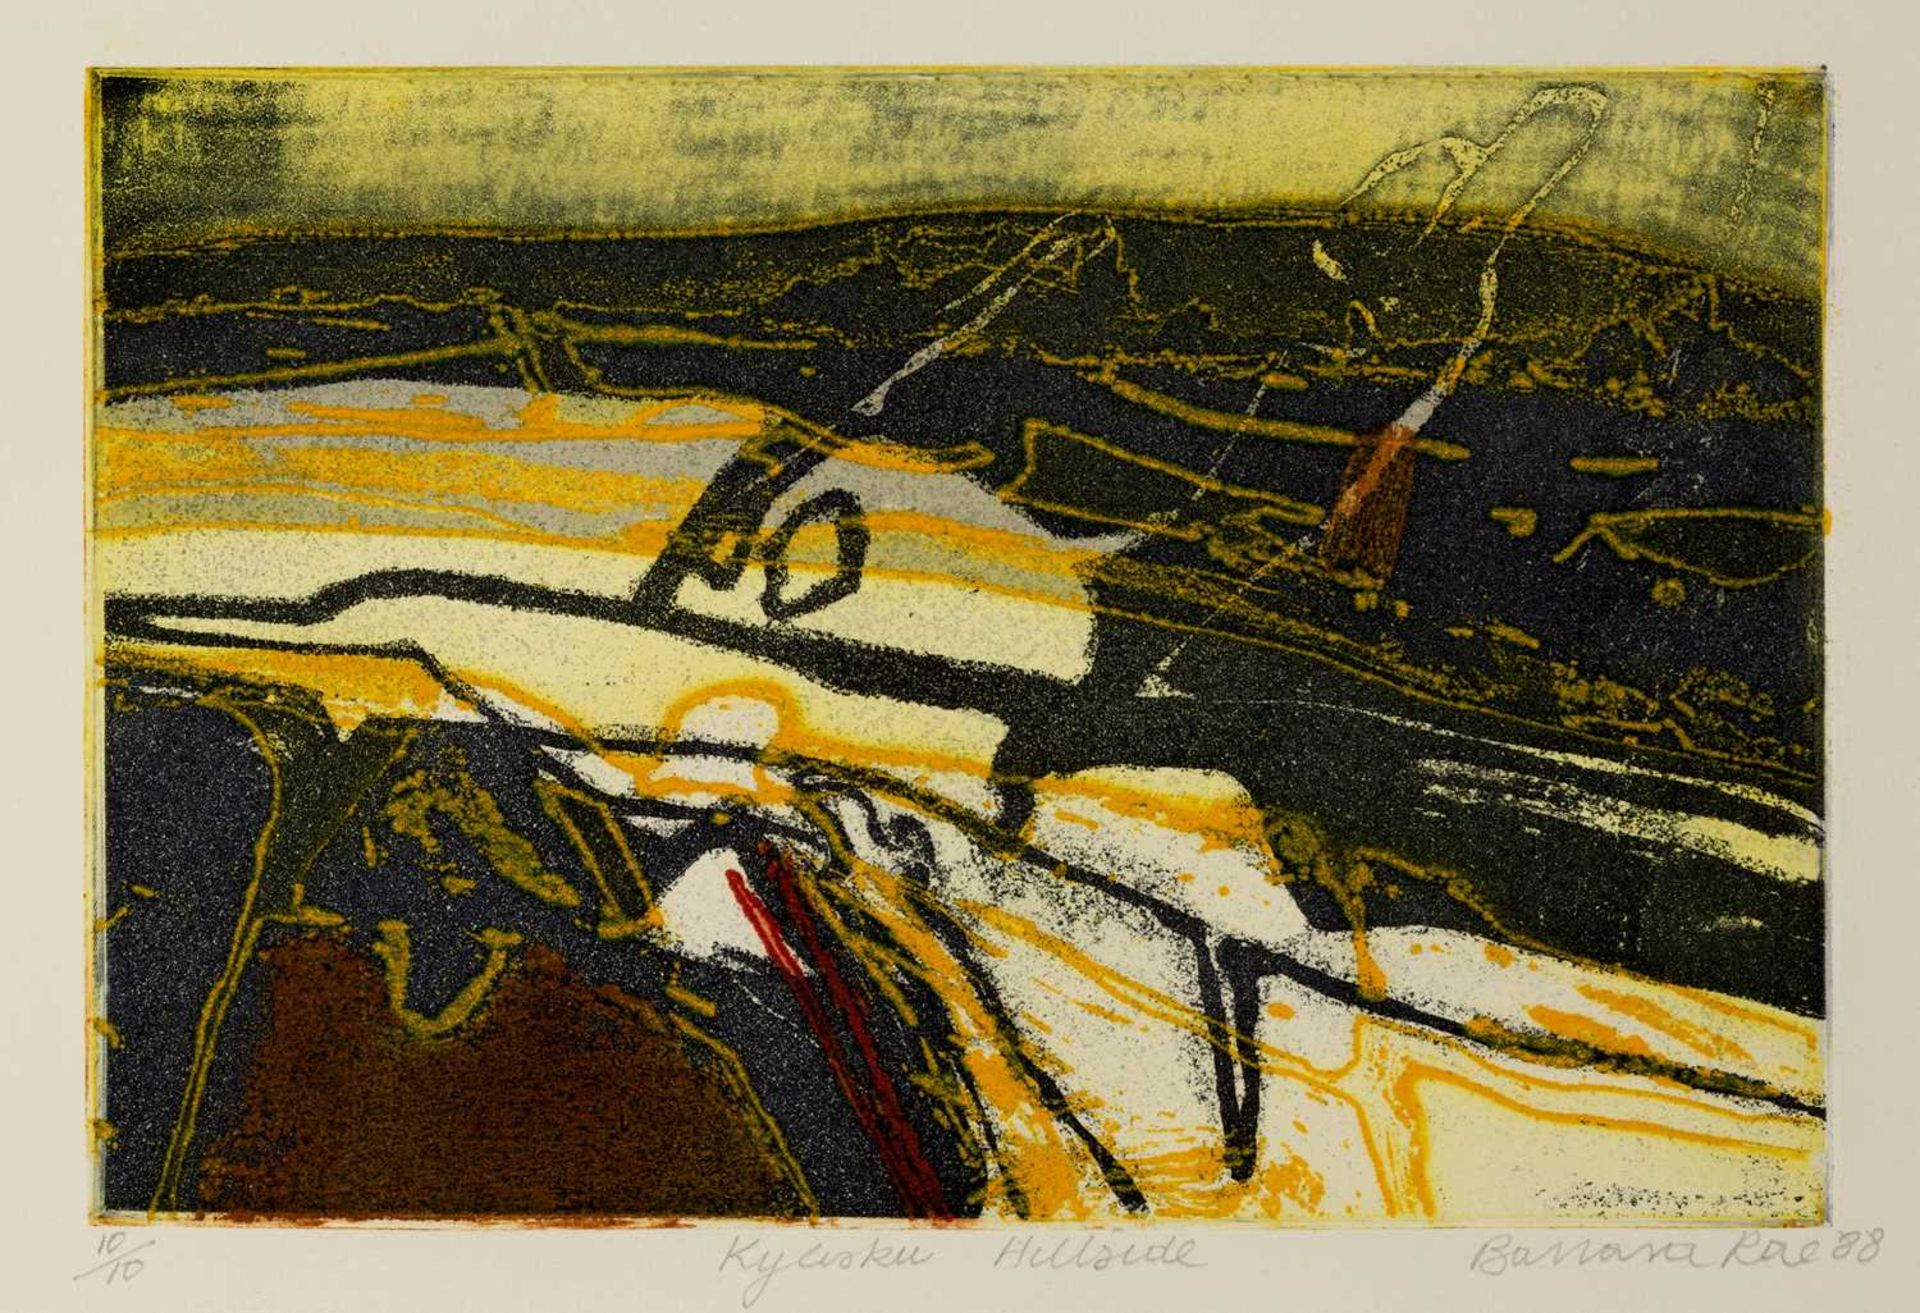 Barbara Rae (b.1943) Hillside, 1988 10/10, signed, numbered, dated, and titled in pencil (in the